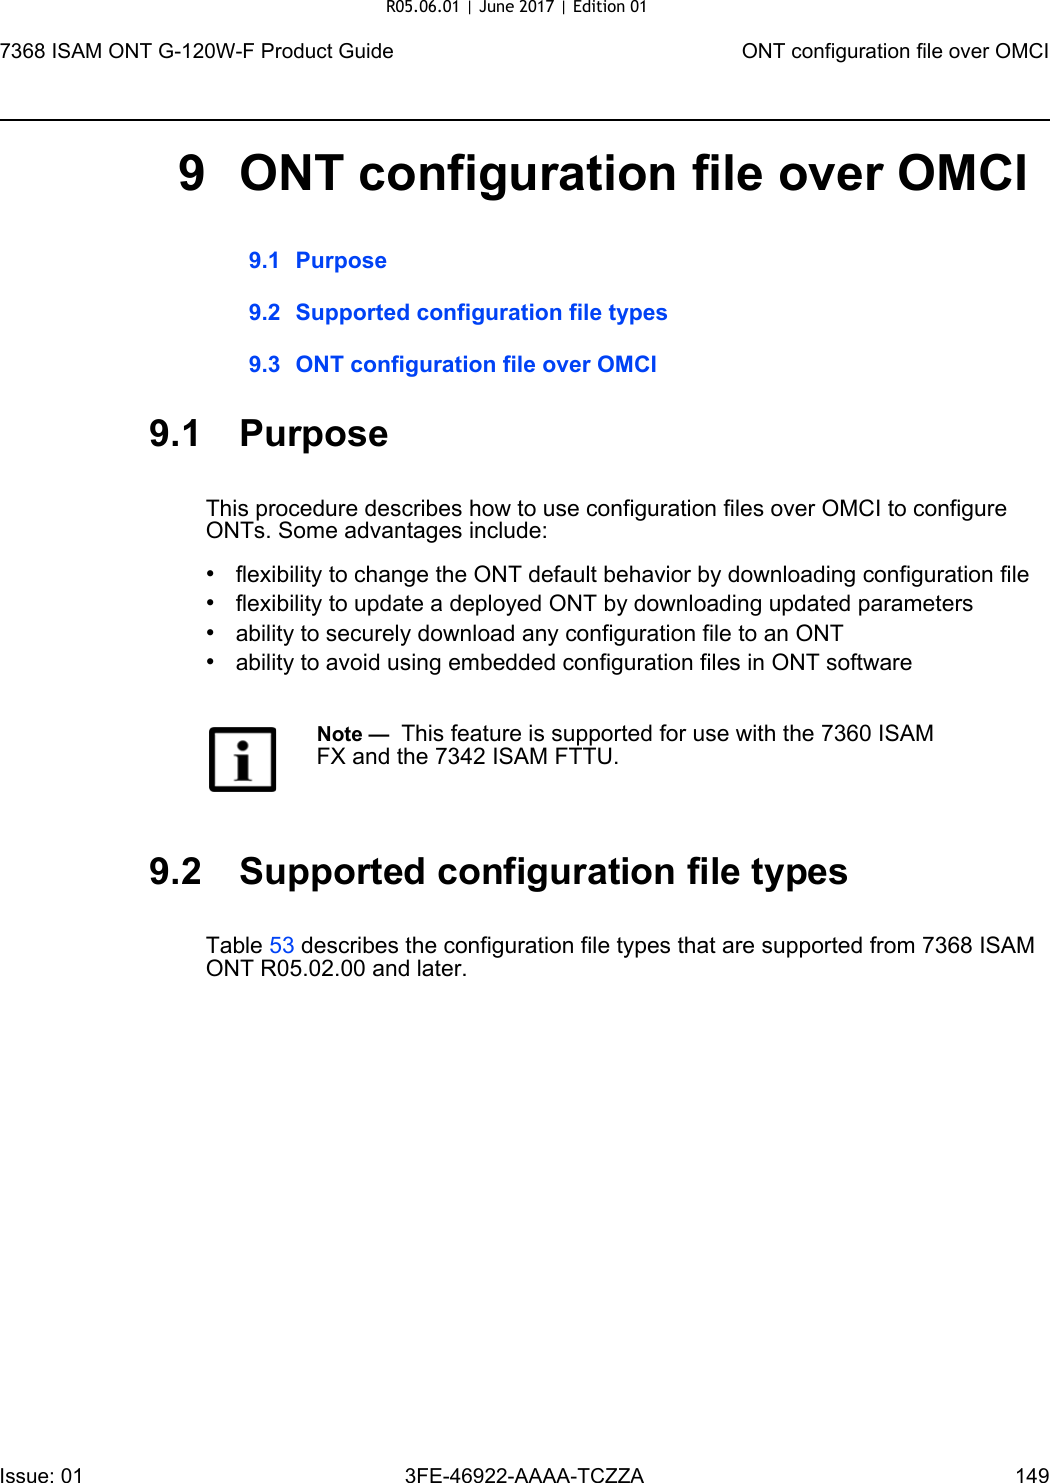 7368 ISAM ONT G-120W-F Product Guide ONT configuration file over OMCIIssue: 01 3FE-46922-AAAA-TCZZA 149 9 ONT configuration file over OMCI9.1 Purpose9.2 Supported configuration file types9.3 ONT configuration file over OMCI9.1 PurposeThis procedure describes how to use configuration files over OMCI to configure ONTs. Some advantages include:•flexibility to change the ONT default behavior by downloading configuration file•flexibility to update a deployed ONT by downloading updated parameters•ability to securely download any configuration file to an ONT•ability to avoid using embedded configuration files in ONT software9.2 Supported configuration file typesTable 53 describes the configuration file types that are supported from 7368 ISAM ONT R05.02.00 and later. Note —  This feature is supported for use with the 7360 ISAM FX and the 7342 ISAM FTTU.R05.06.01 | June 2017 | Edition 01 